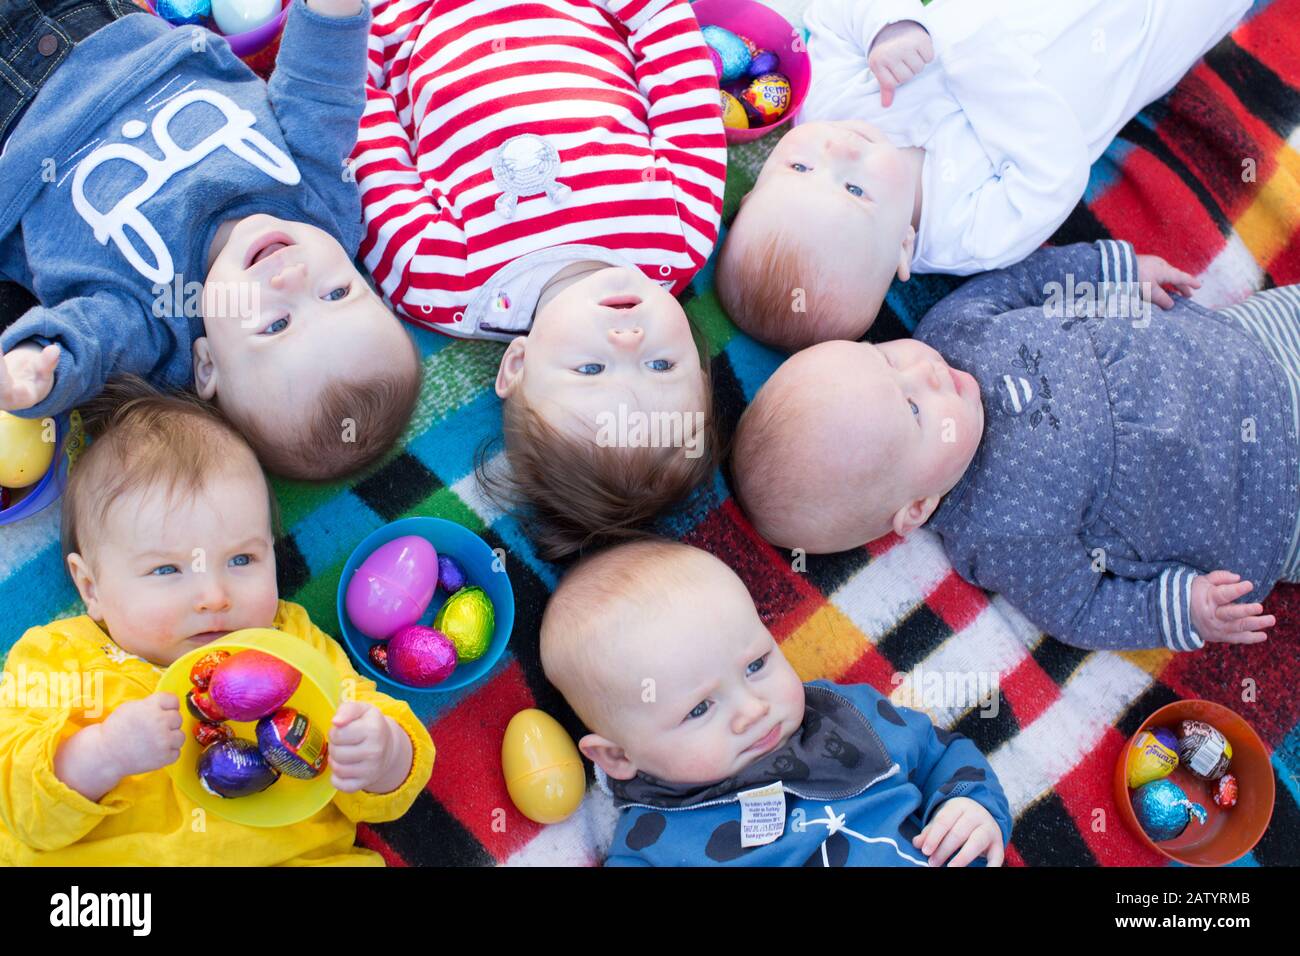 A group of 6 month old babies, U.K Stock Photo